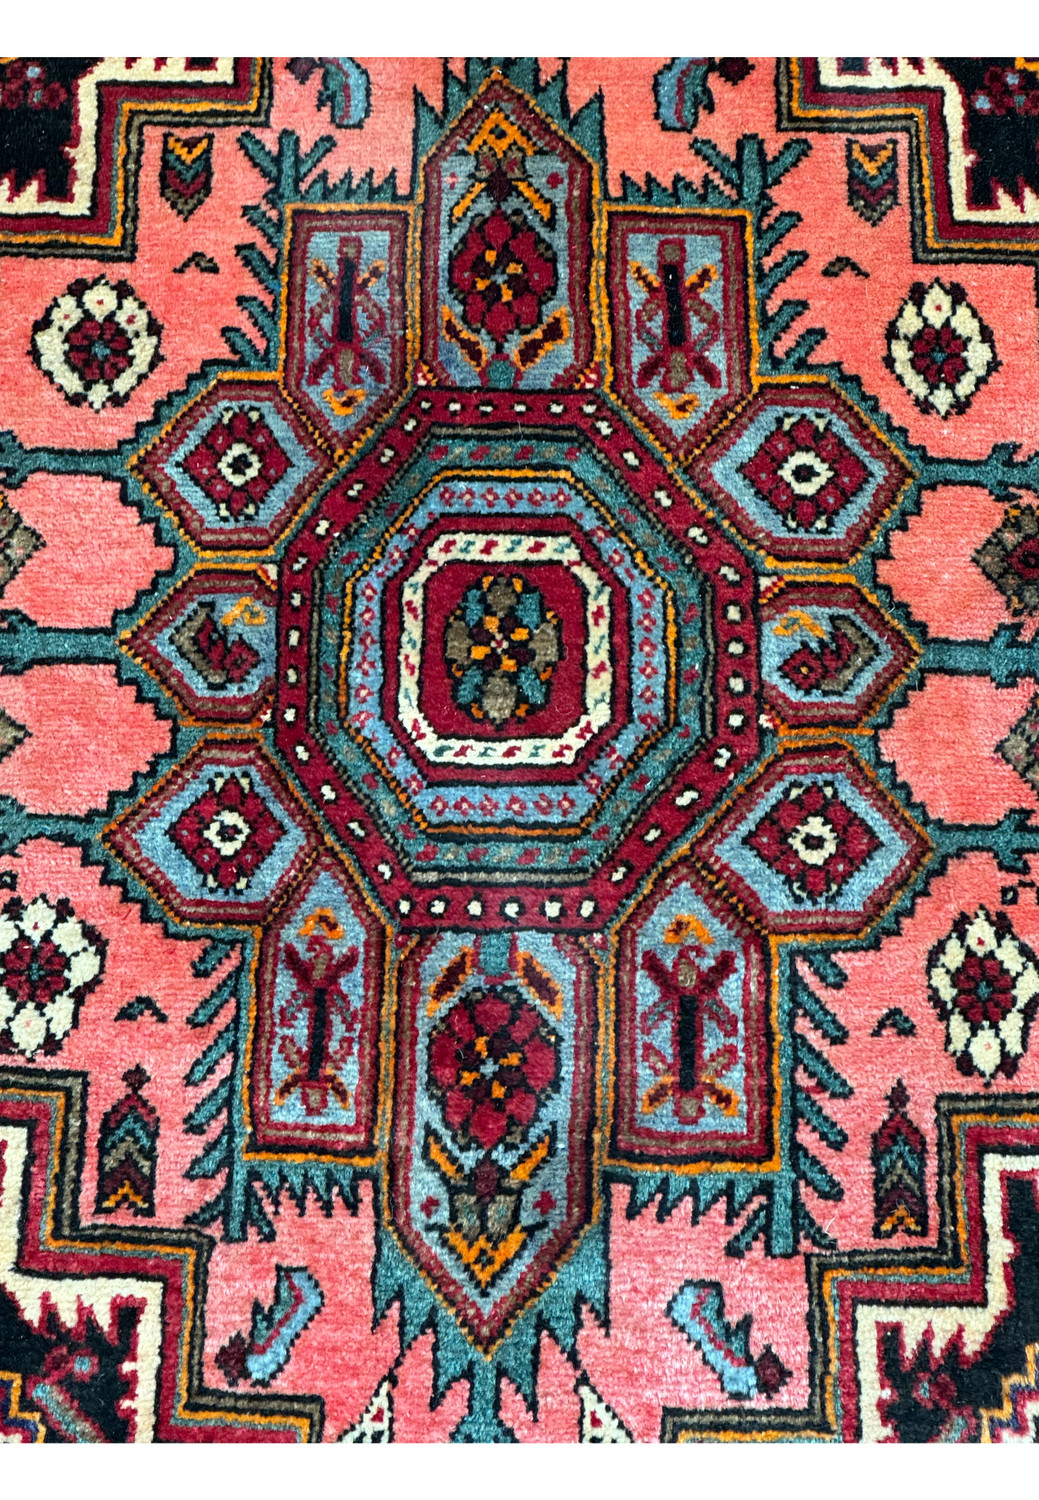 Elegant floral patterns and geometric shapes of a 4x6 Persian Gholtogh rug